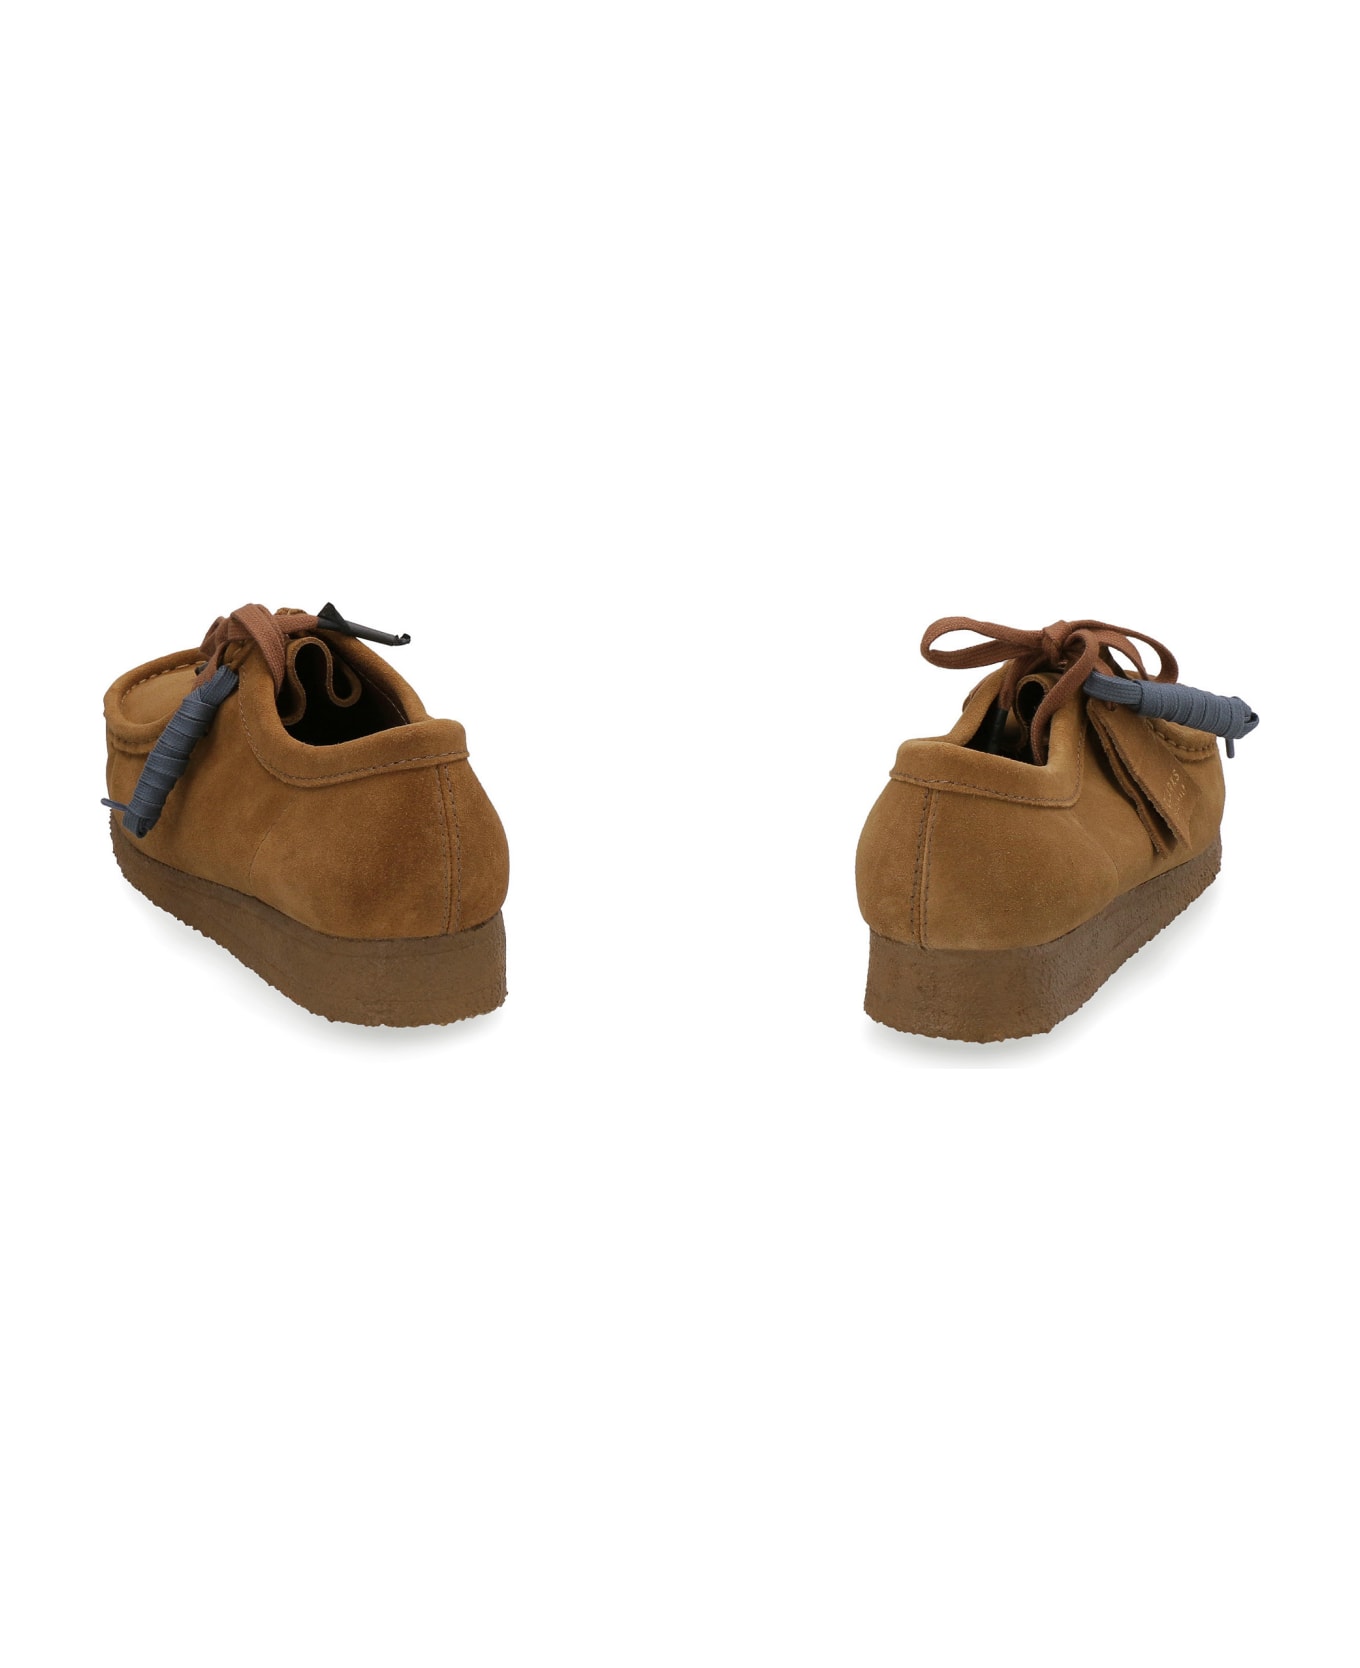 Clarks Wallabee Suede Lace-up Shoes - Saddle Brown